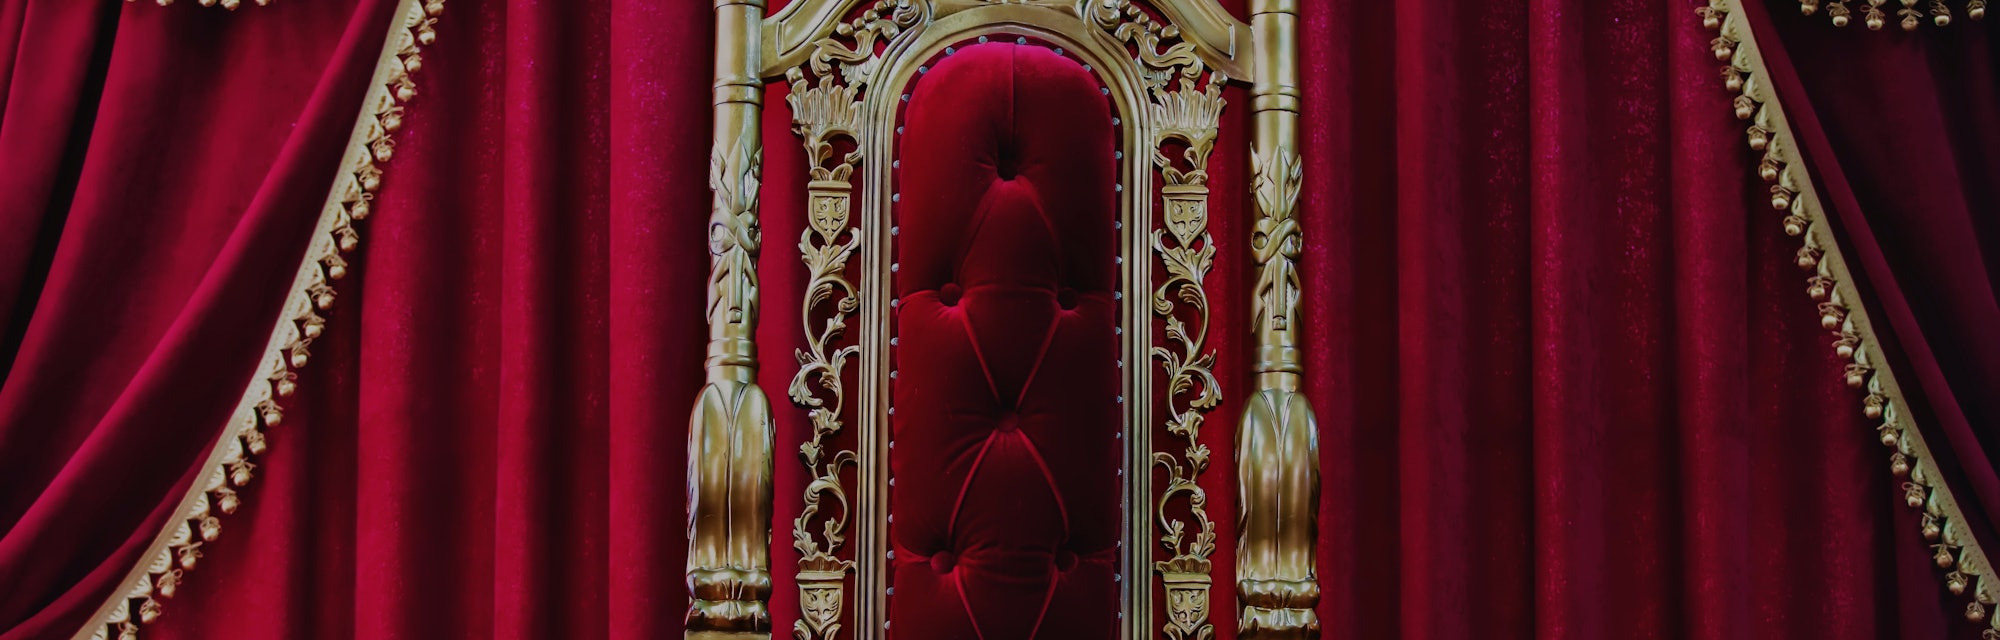 Part of the red royal chair against the background of red curtains. A place for a king. Throne